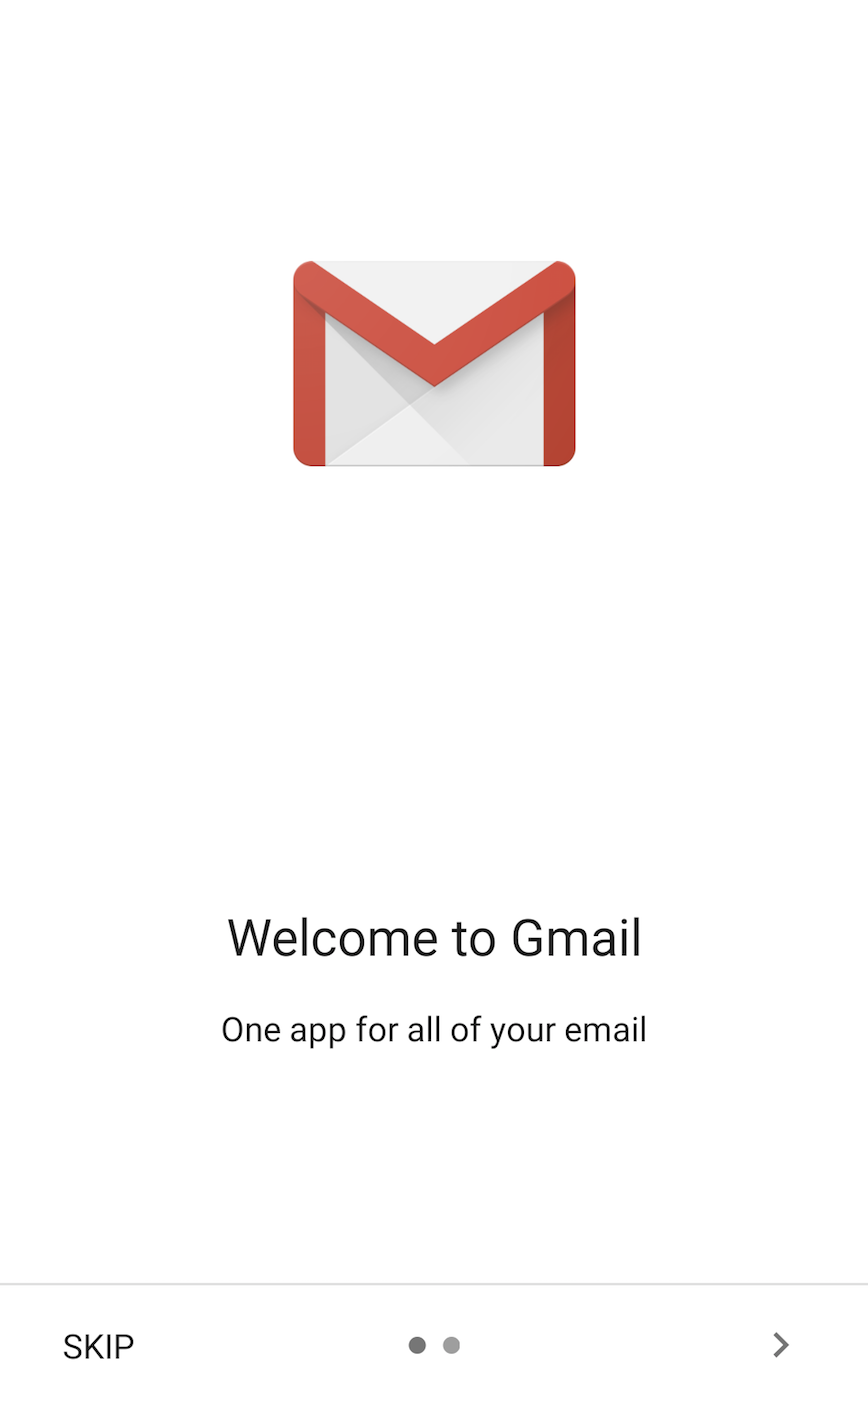 Gmail app welcome message